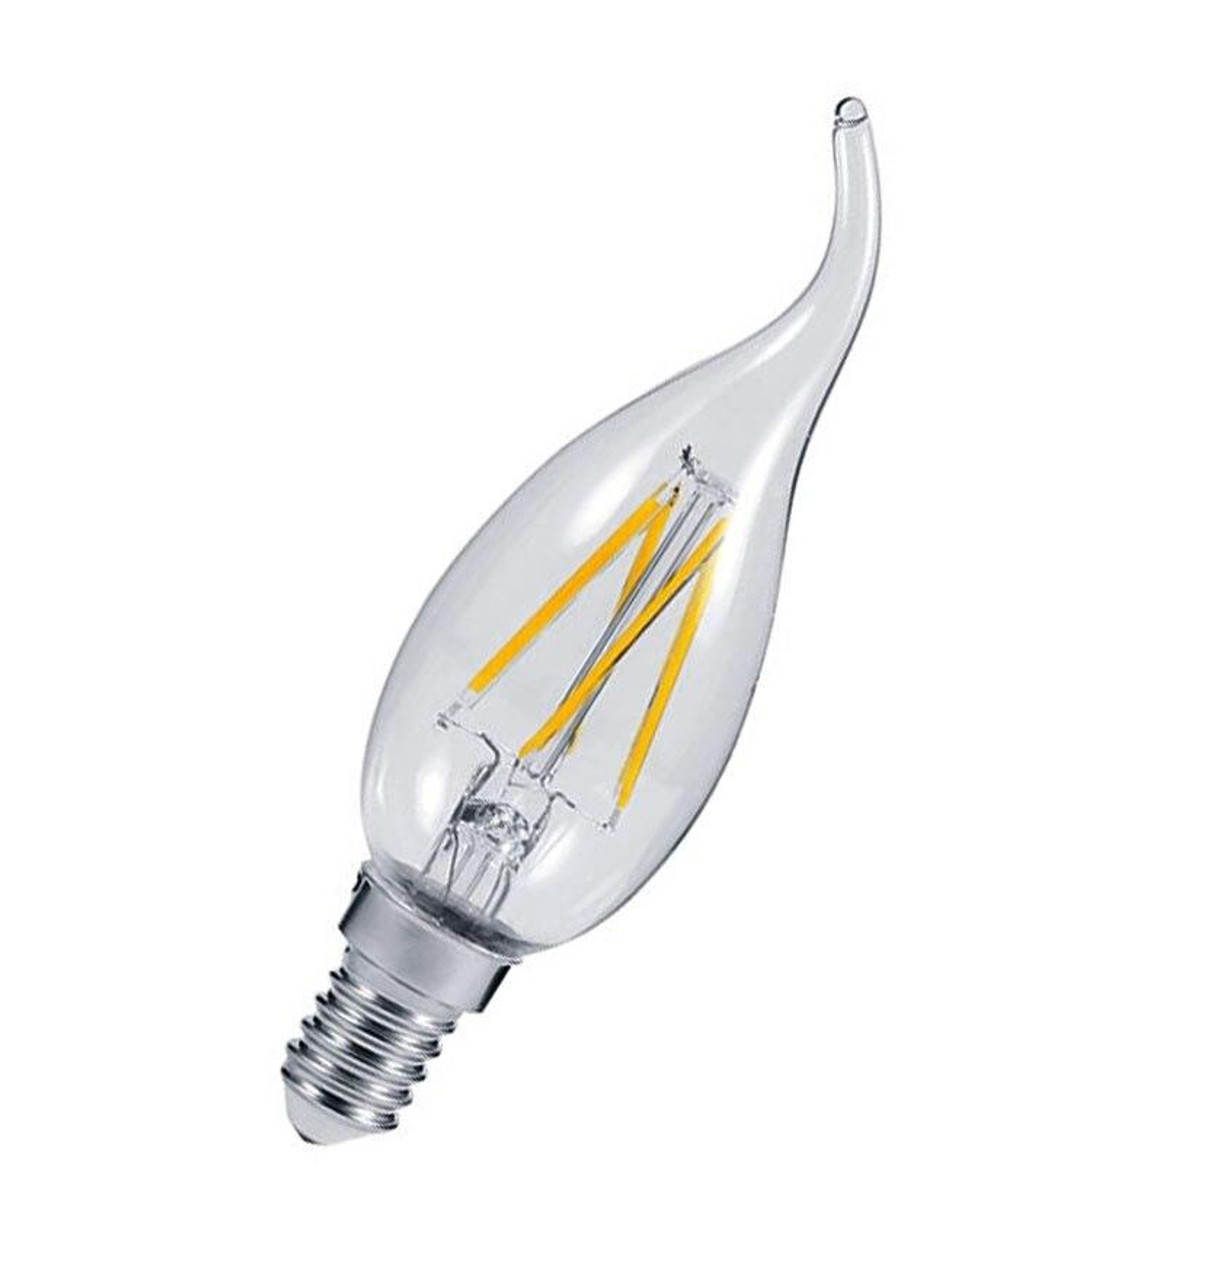 mlight LED lampe bougie 3W/E14 2900K non dimmable